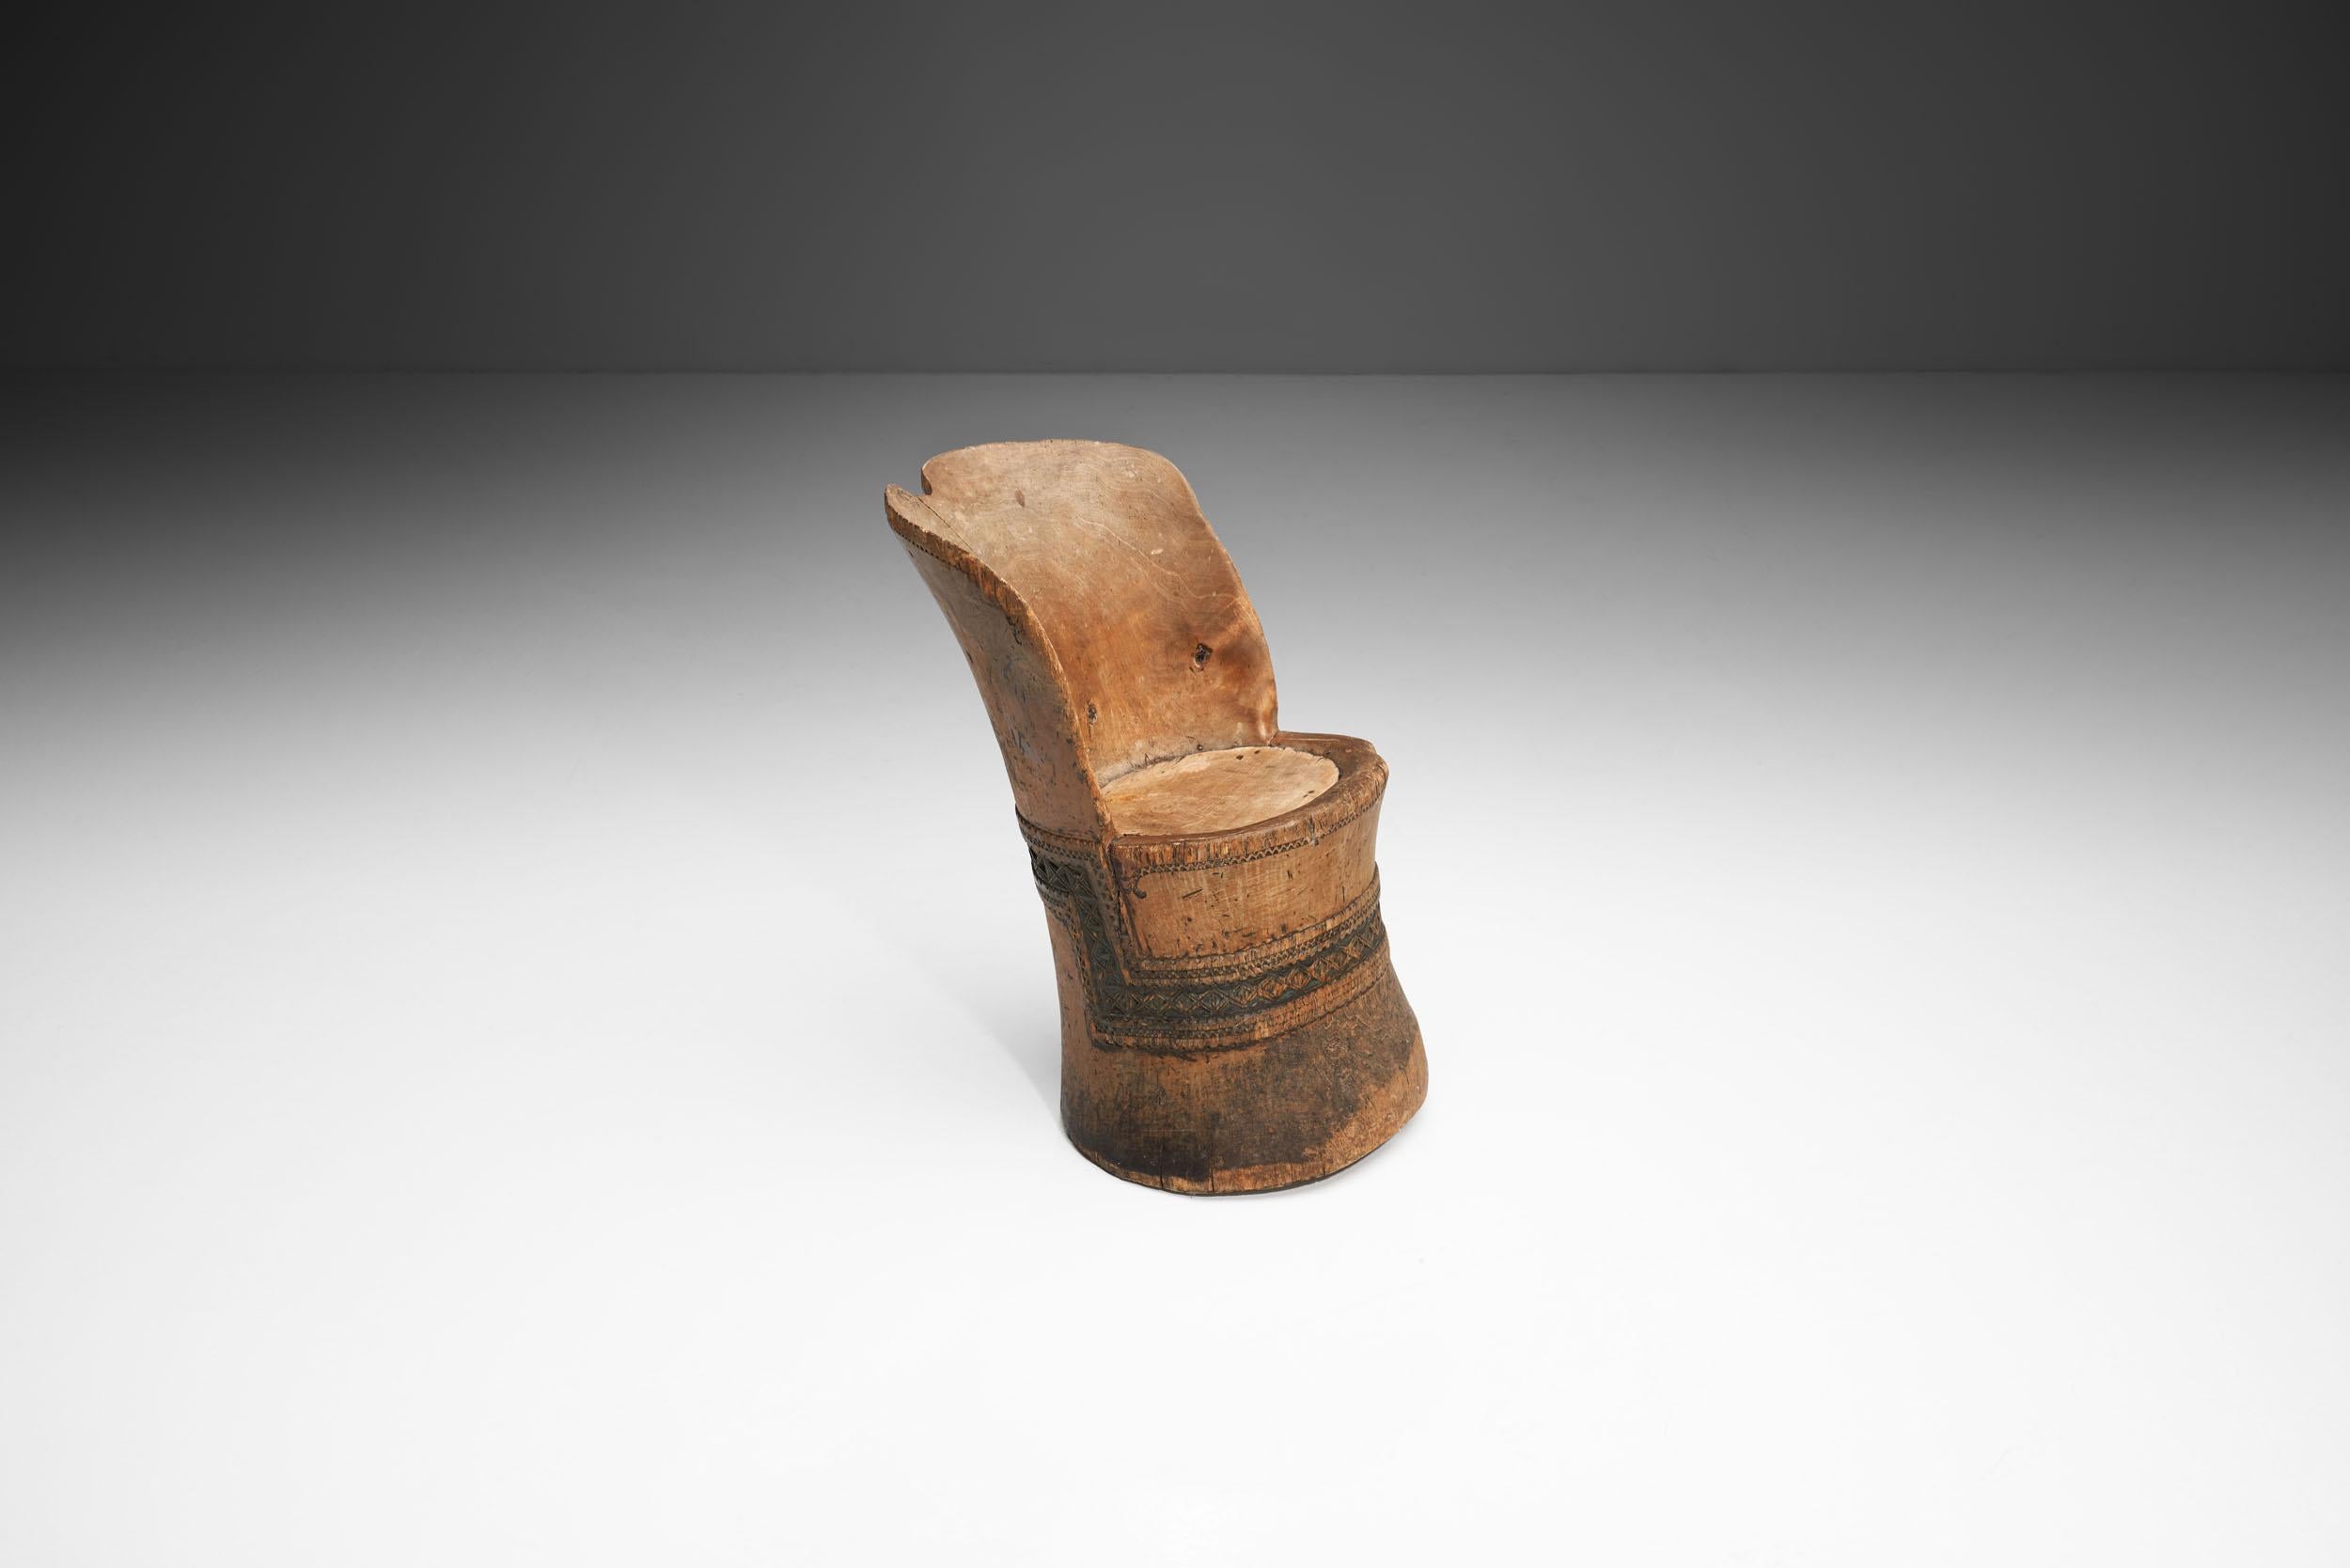 This “kubbstol” or “kubbestol” is a traditional Scandinavian chair made from a log. The kubbestol was quite common in some districts of Norway from about 1750 to 1960, where it was usually made from logs with significant girth and three to four feet